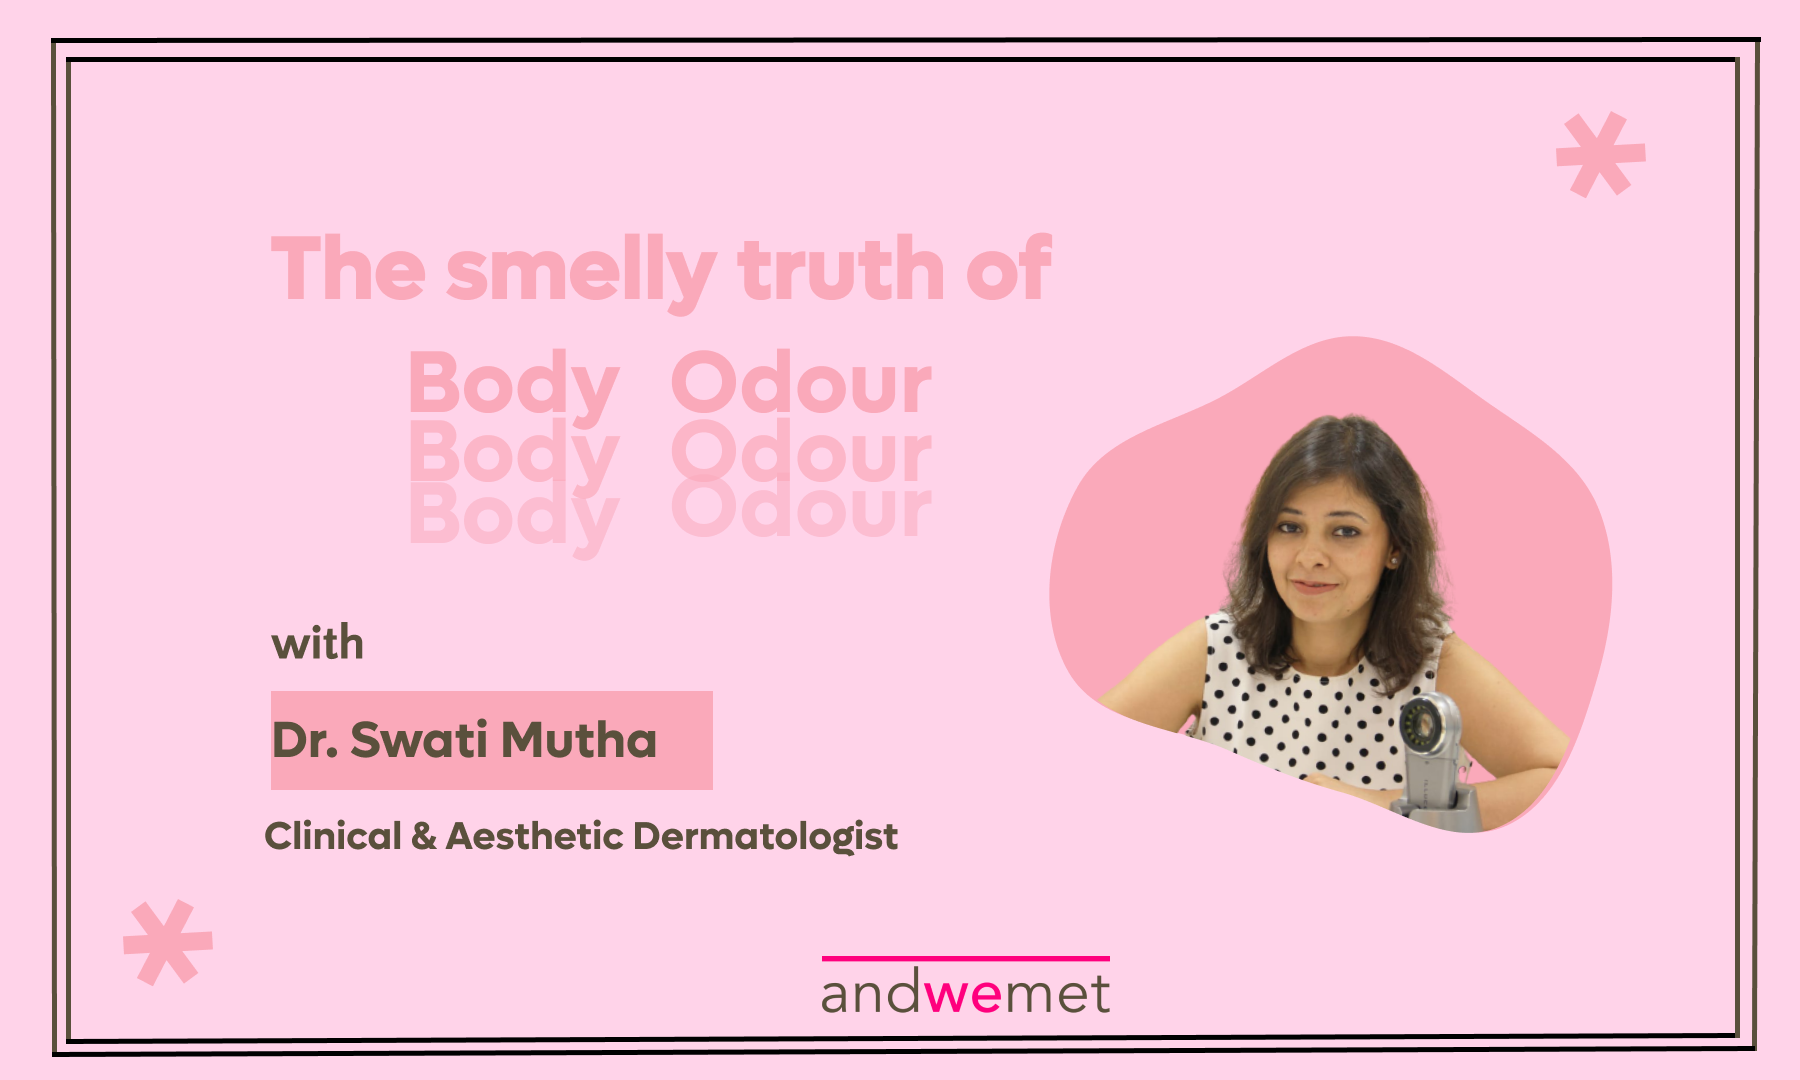 andwemet in conversation with Dr Swati Mutha on The Smelly Story of Body Odour